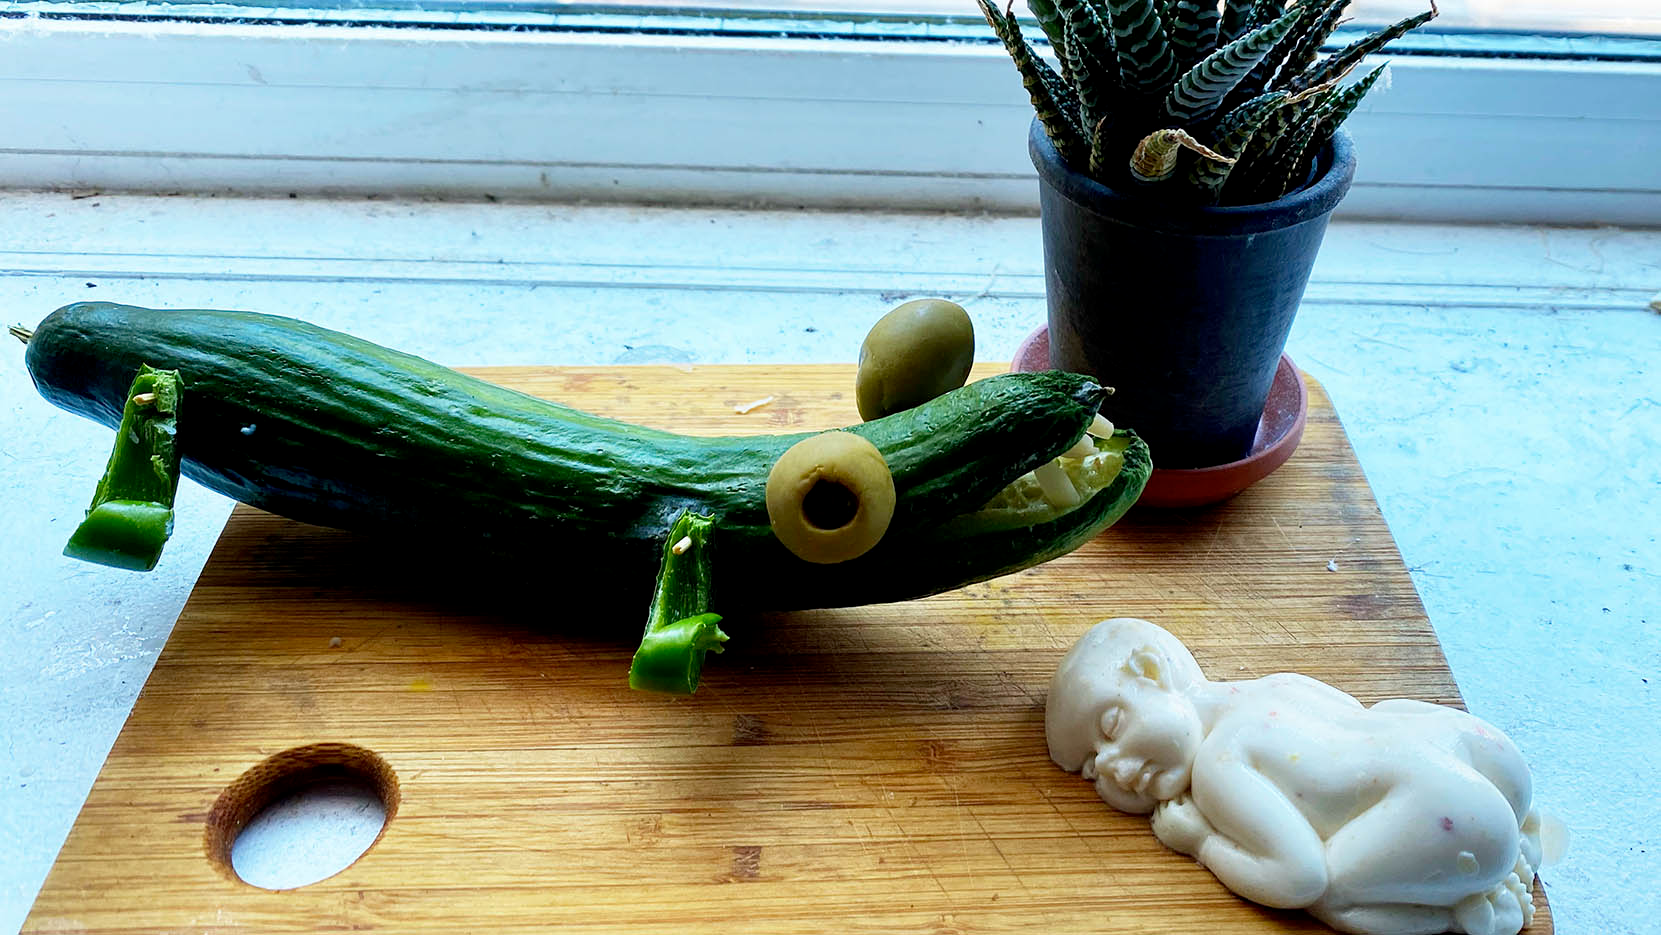 A Crocodile Cucumber watches over a Bacon Moussé baby